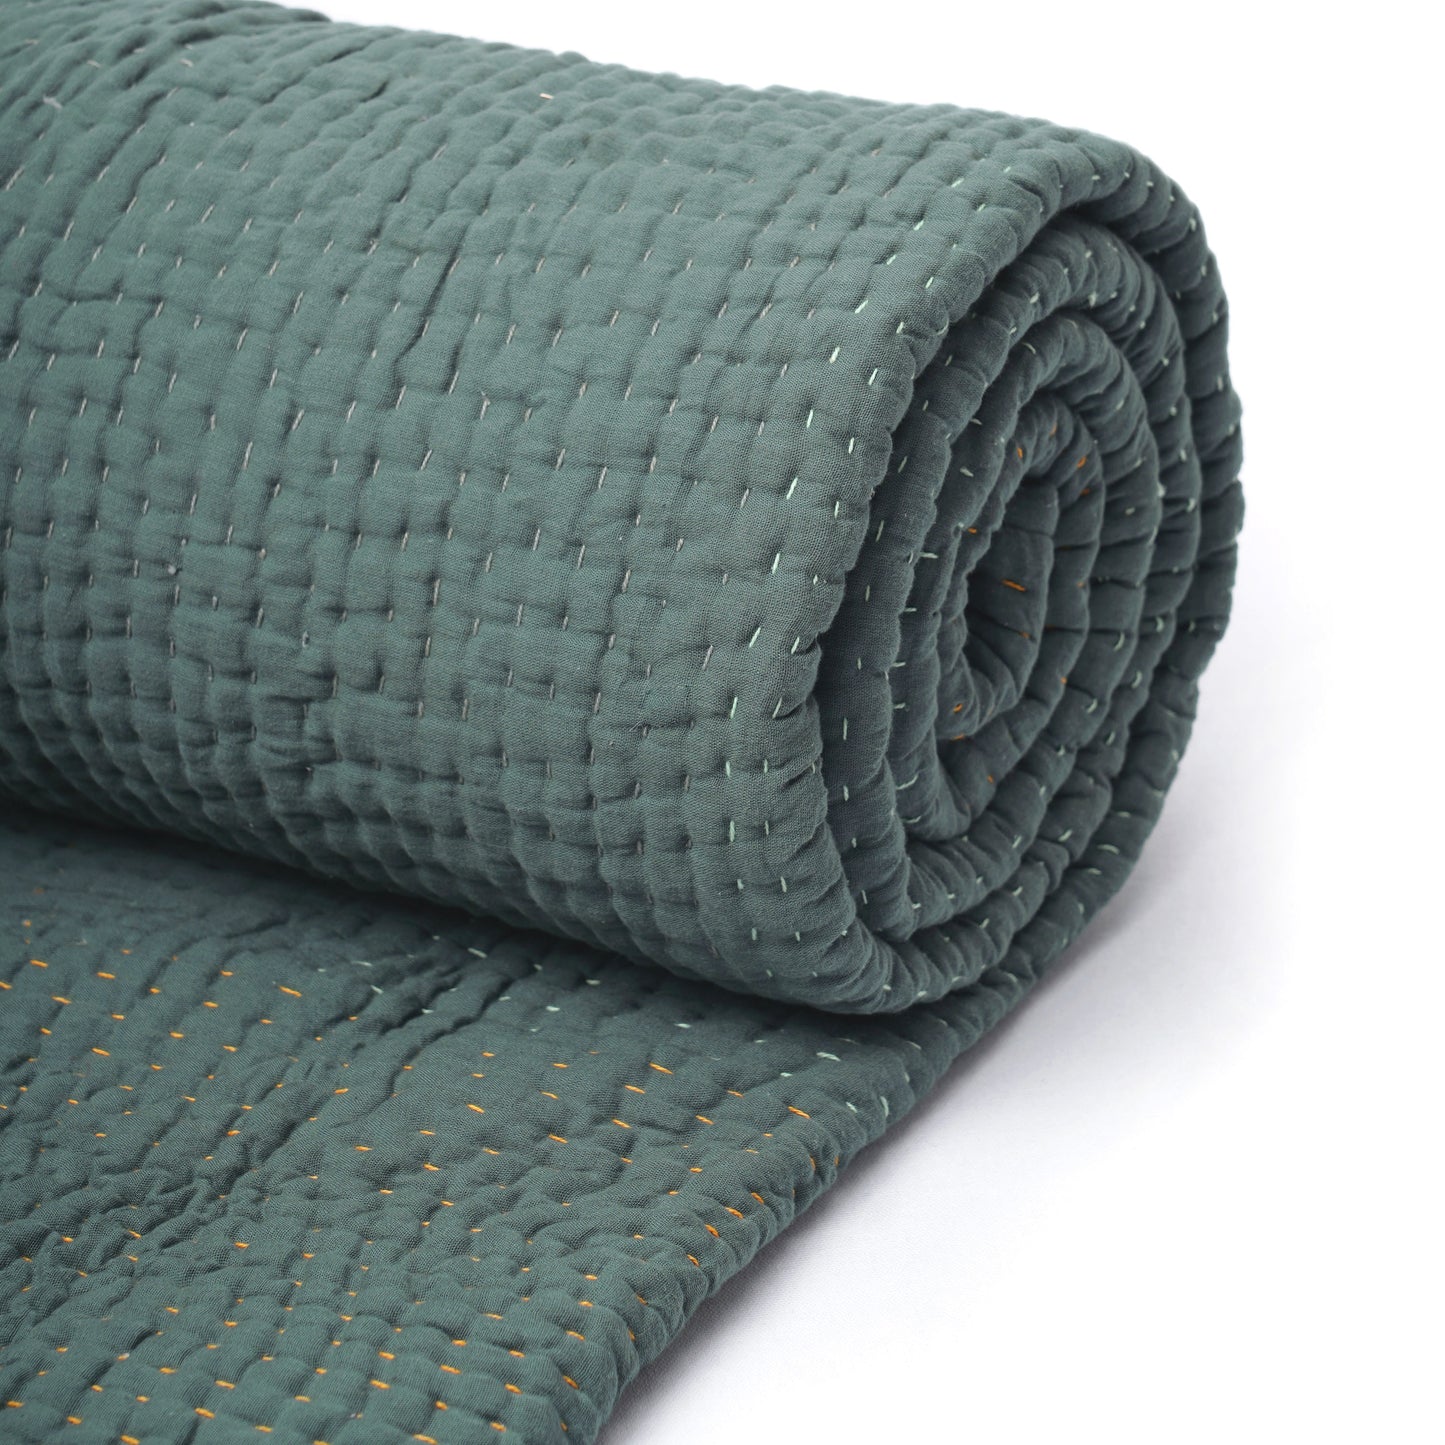 Olive Green quilted sets or quilts - hand quilted 4 layer muslin gauze, sizes available